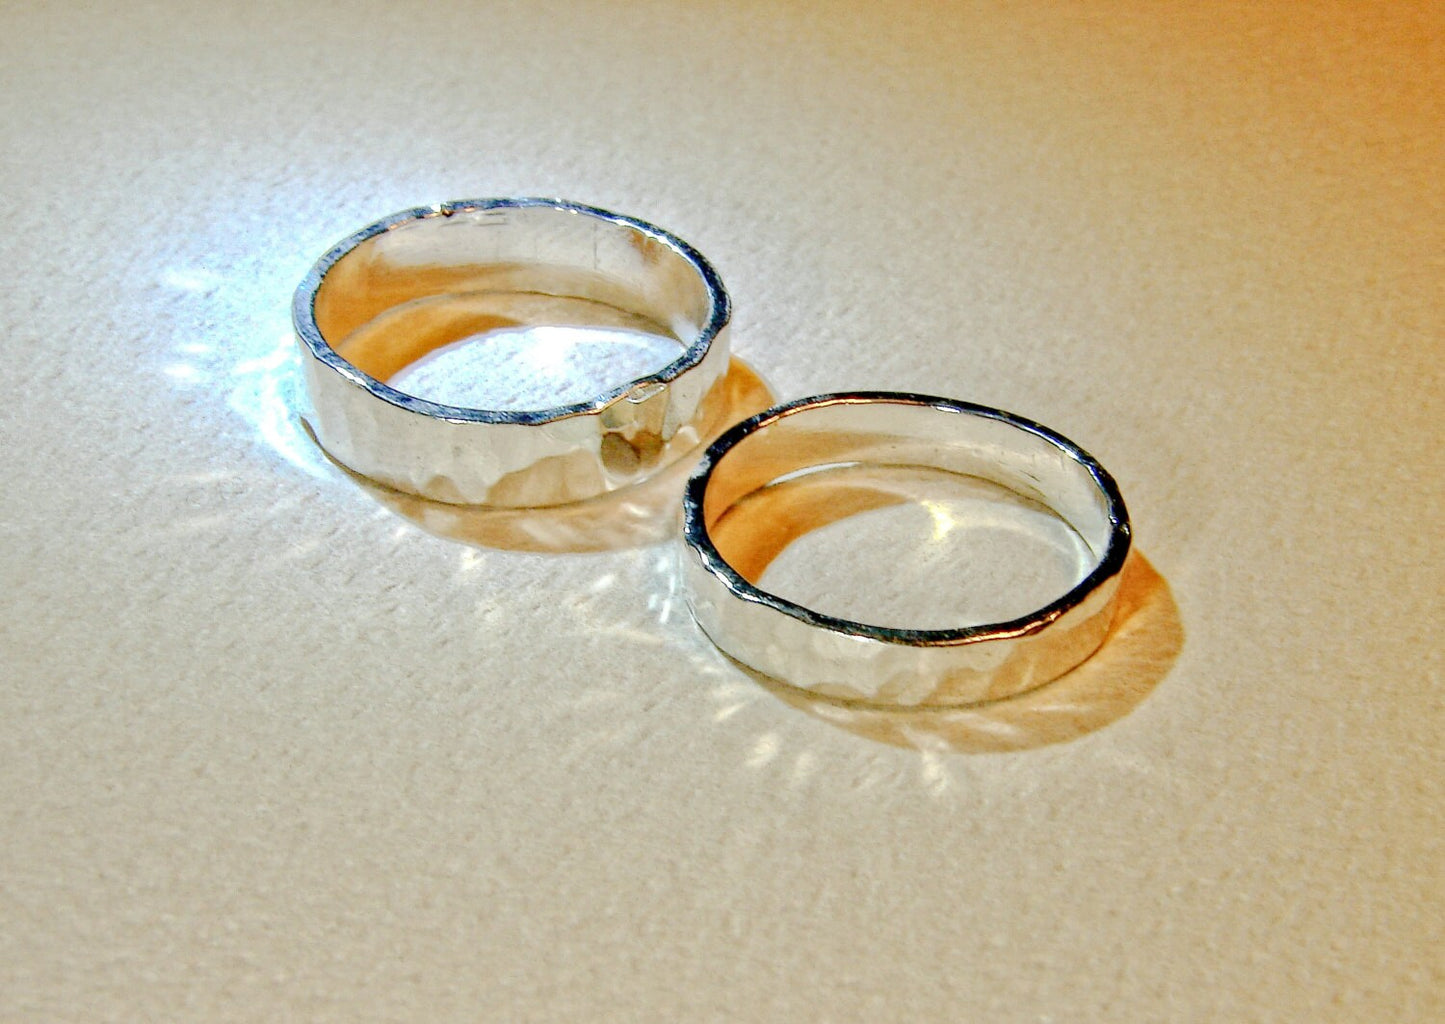 Hammered sterling silver ring set or weddings bands with the ability to customize